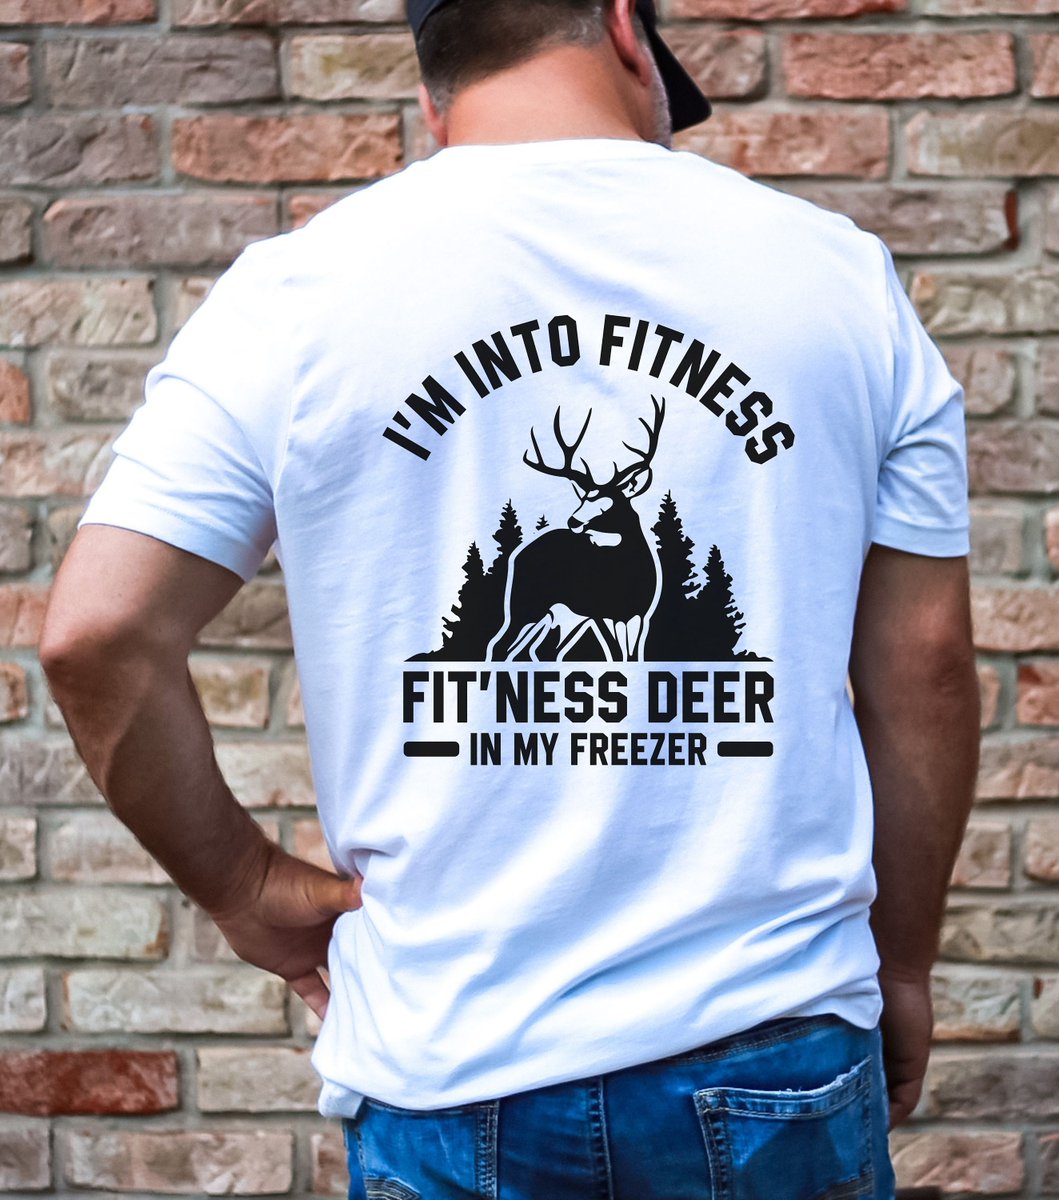 Great gift for the man who loves deer hunting. I'm Into Fitness T-shirt, Deer Shirt, Deer Hunting Shirts, Men's Hunting Shirt, Men Shirts Hunting, Hunter Shirt, Hunting Gift, Gift for Dad etsy.me/3H1bduL #shortsleeve #crew #dadbirthdaygift #huntinggifts